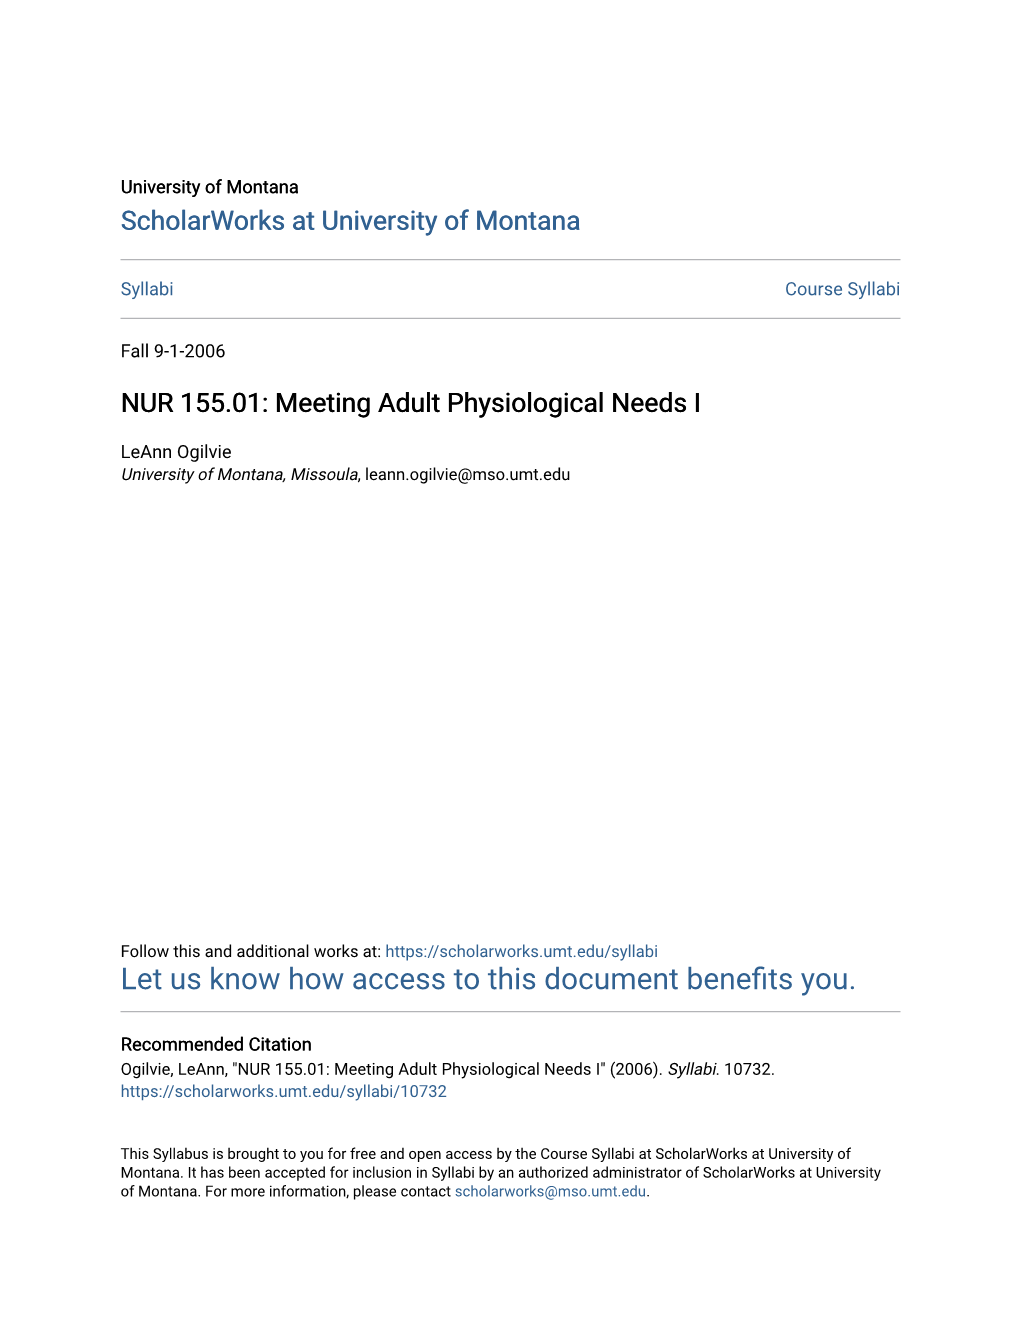 NUR 155.01: Meeting Adult Physiological Needs I